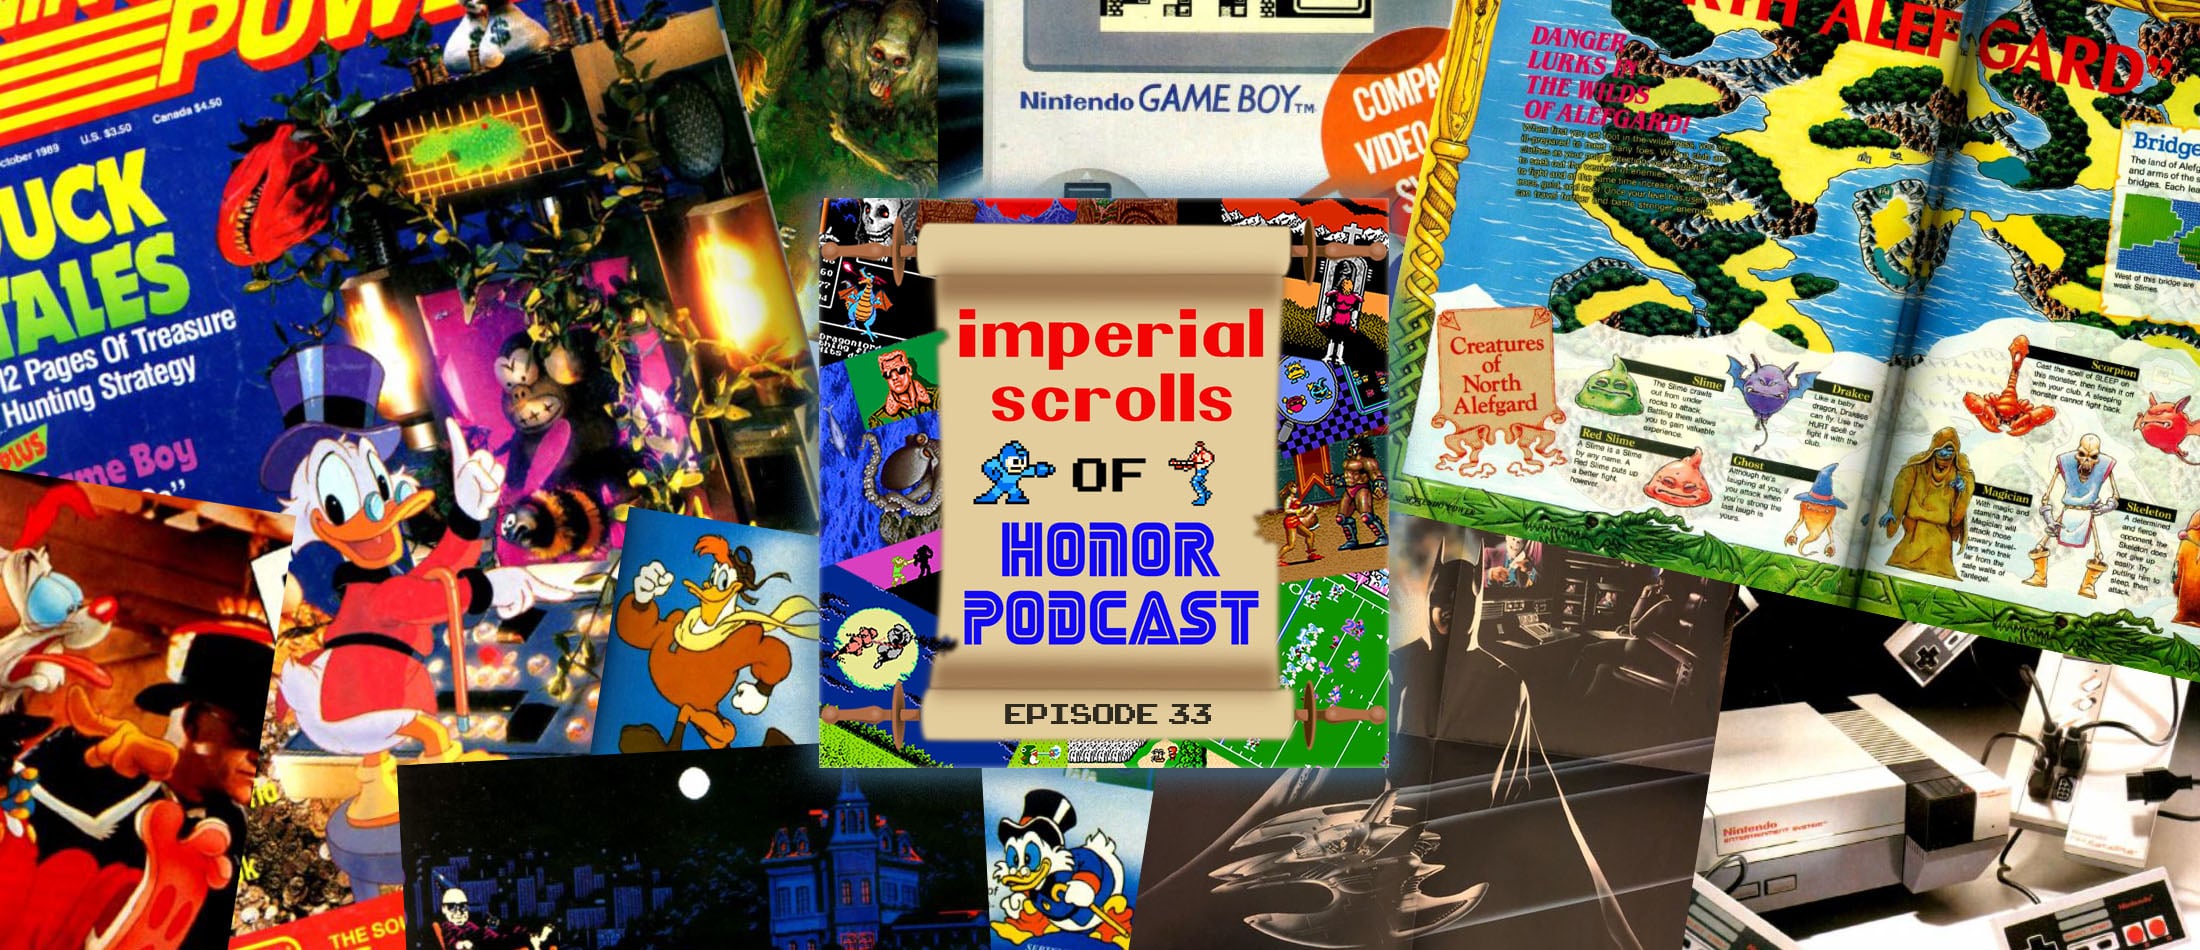 Imperial Scrolls of Honor Podcast - Episode 33 - Nintendo Power #8